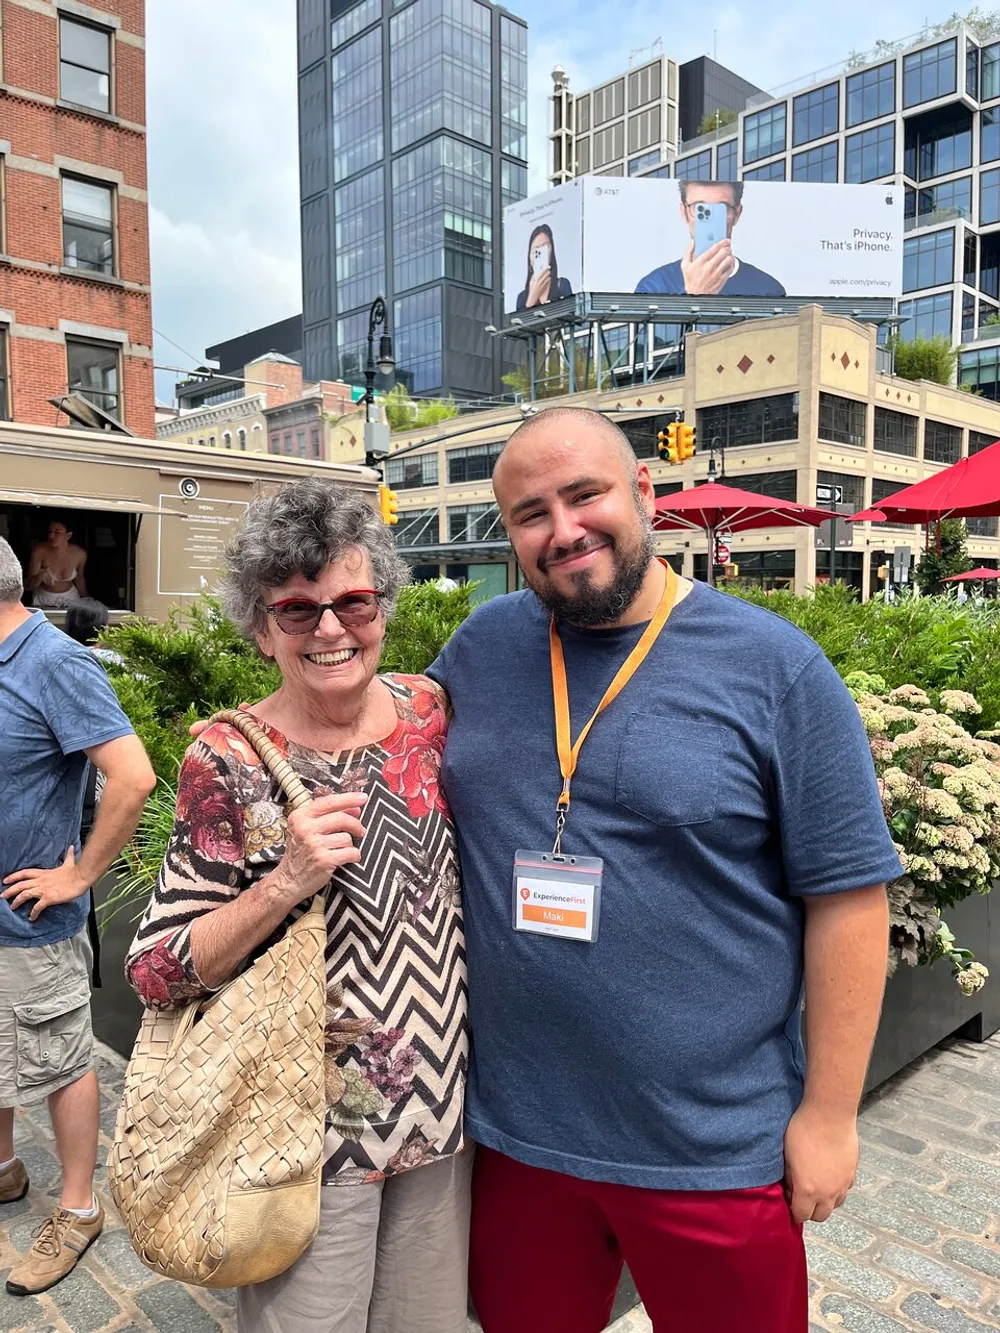 A smiling older woman and a bearded man are posing for a photo on a sunny day in an urban environment with a large iPhone advertisement in the background